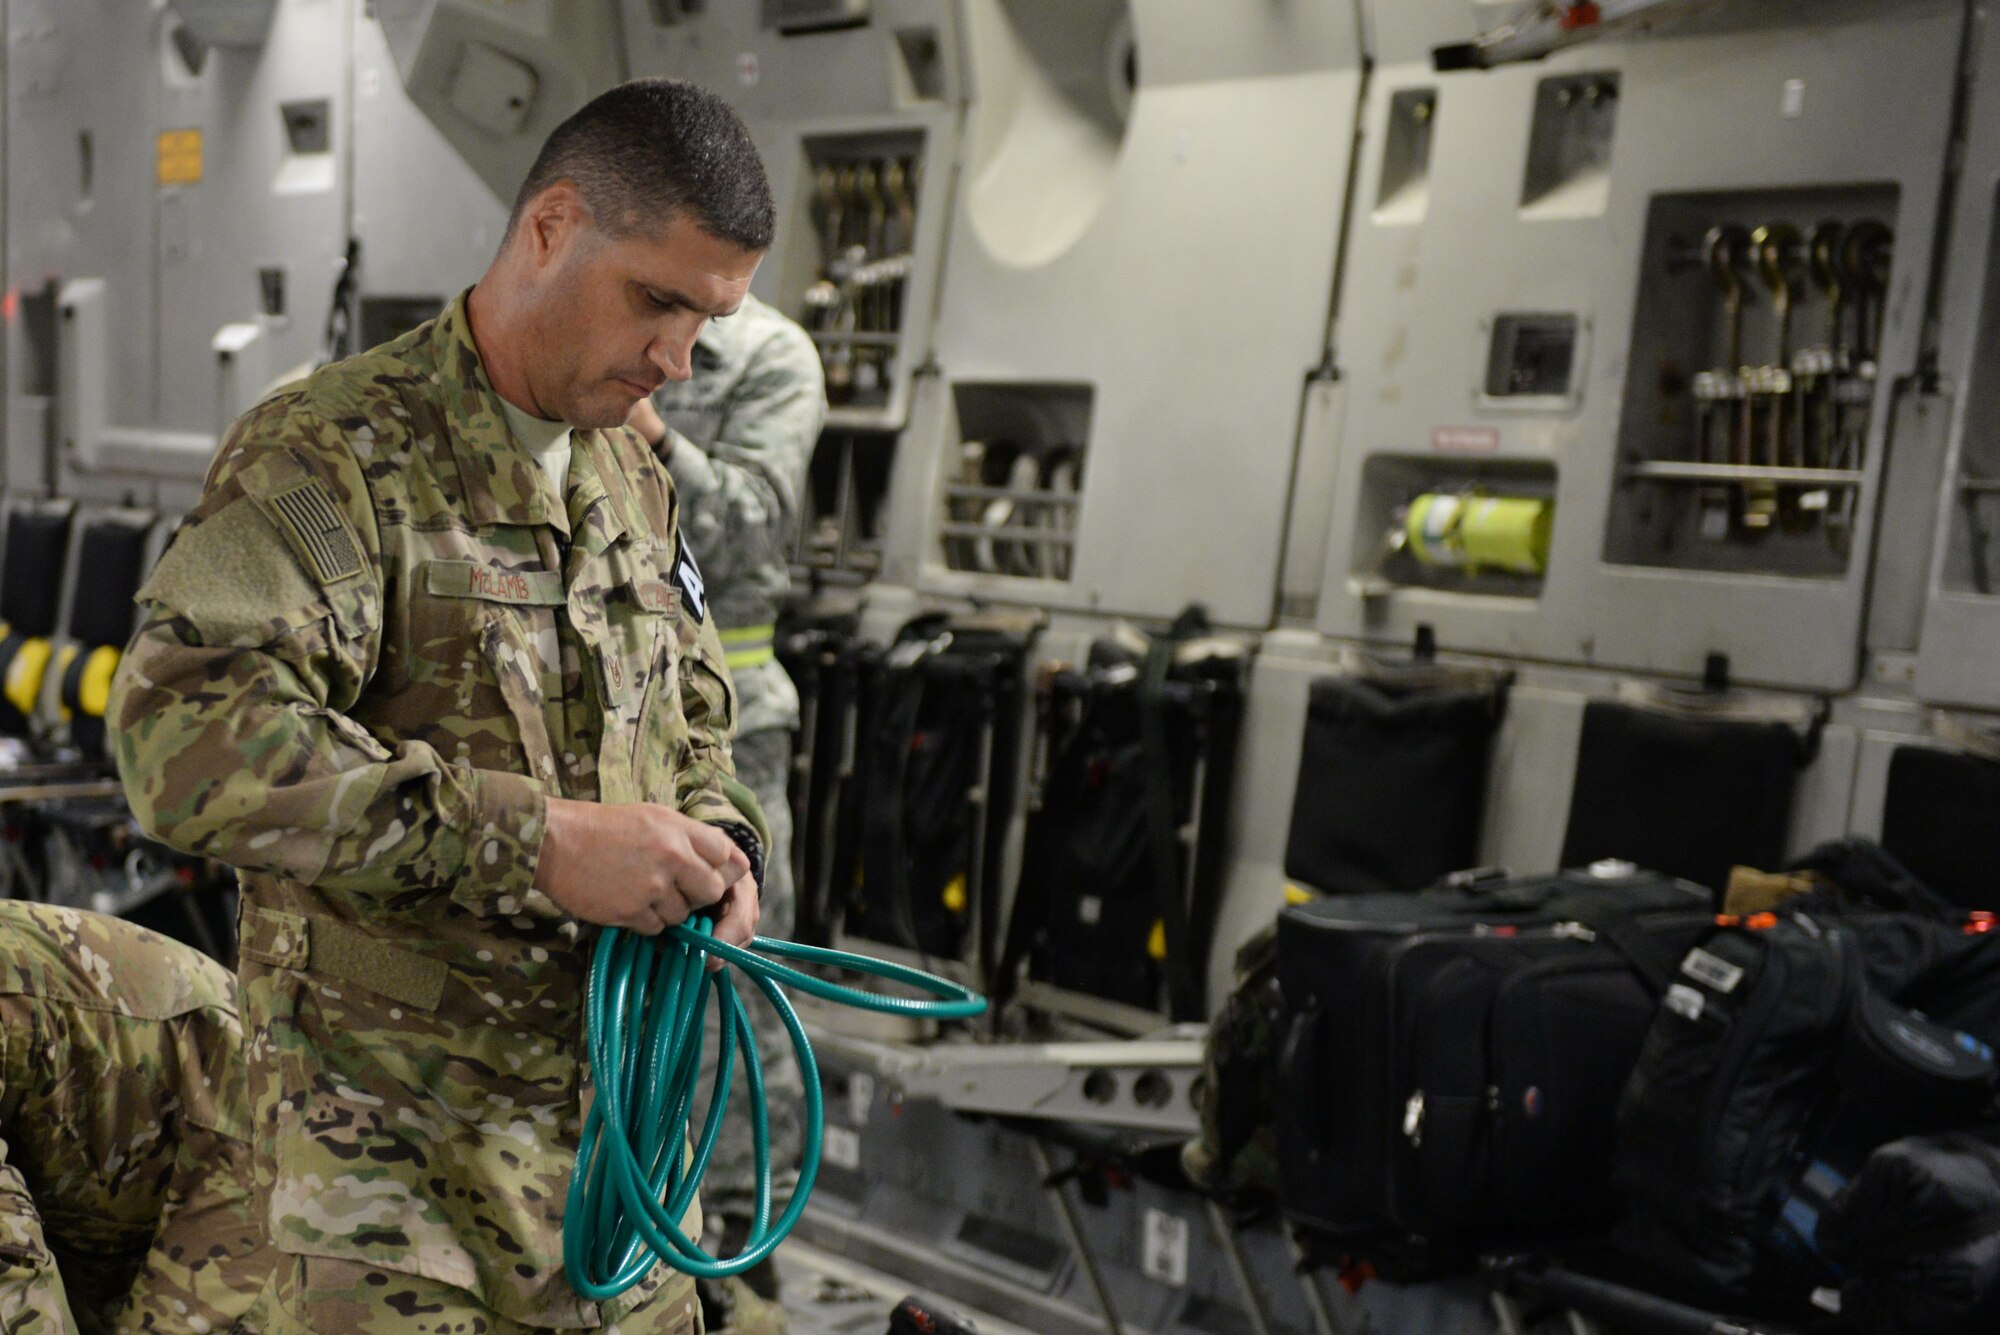 U.S. Air Force Tech. Sgt. Russell “Rusty” McLamb, 455th Expeditionary Aeromedical Evacuation Squadron technician deployed from the North Carolina Air National Guard’s 156th Aeromedical Evacuation Squadron, breaks down electrical and oxygen lines for medical equipment on a C-17 Globemaster III aircraft on the flight line at Ramstein Air Base, Germany, Aug. 9, 2015, after an aeromedical evacuation mission from Bagram Airfield, Afghanistan. McLamb is part of the 455th EAES, which is responsible for evacuating the sick and wounded from Central Command to higher echelons of medical care. (U.S. Air Force photo by Maj. Tony Wickman/Released)